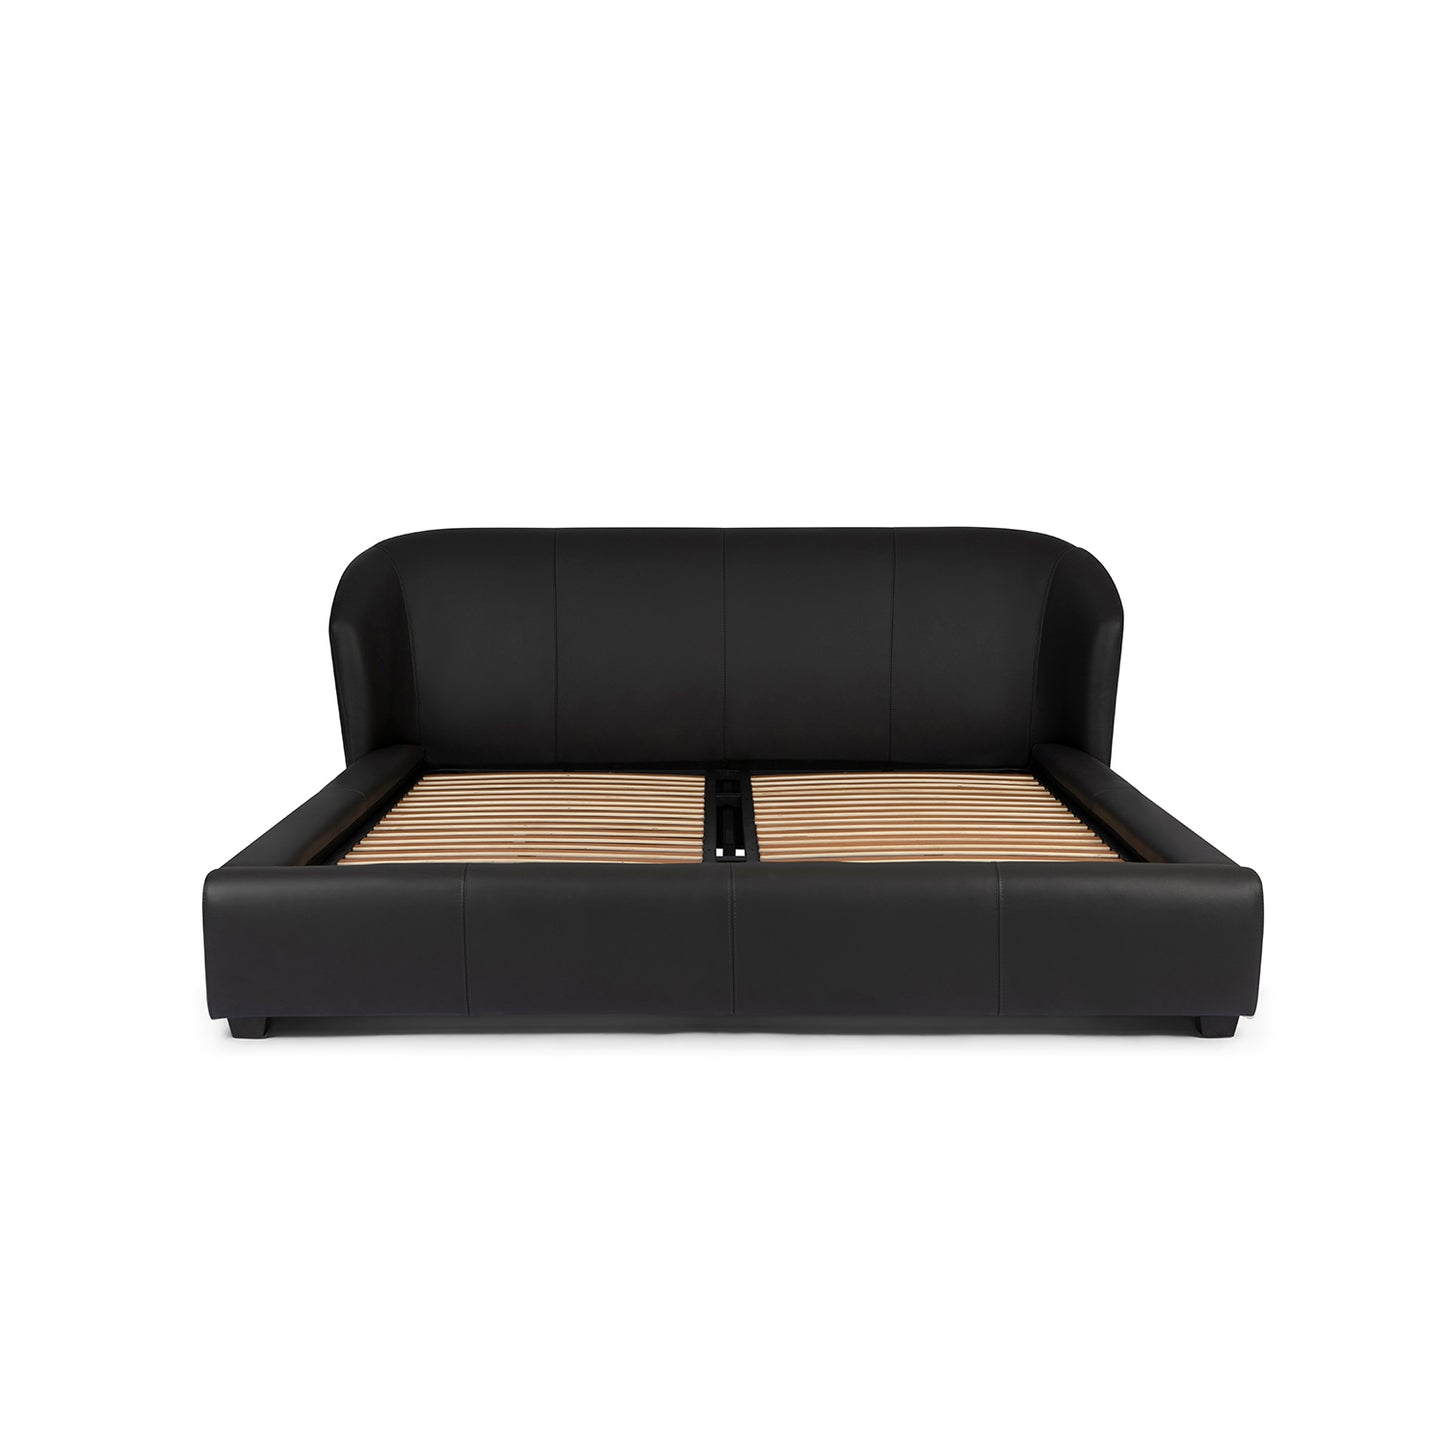 Square Leather Bed